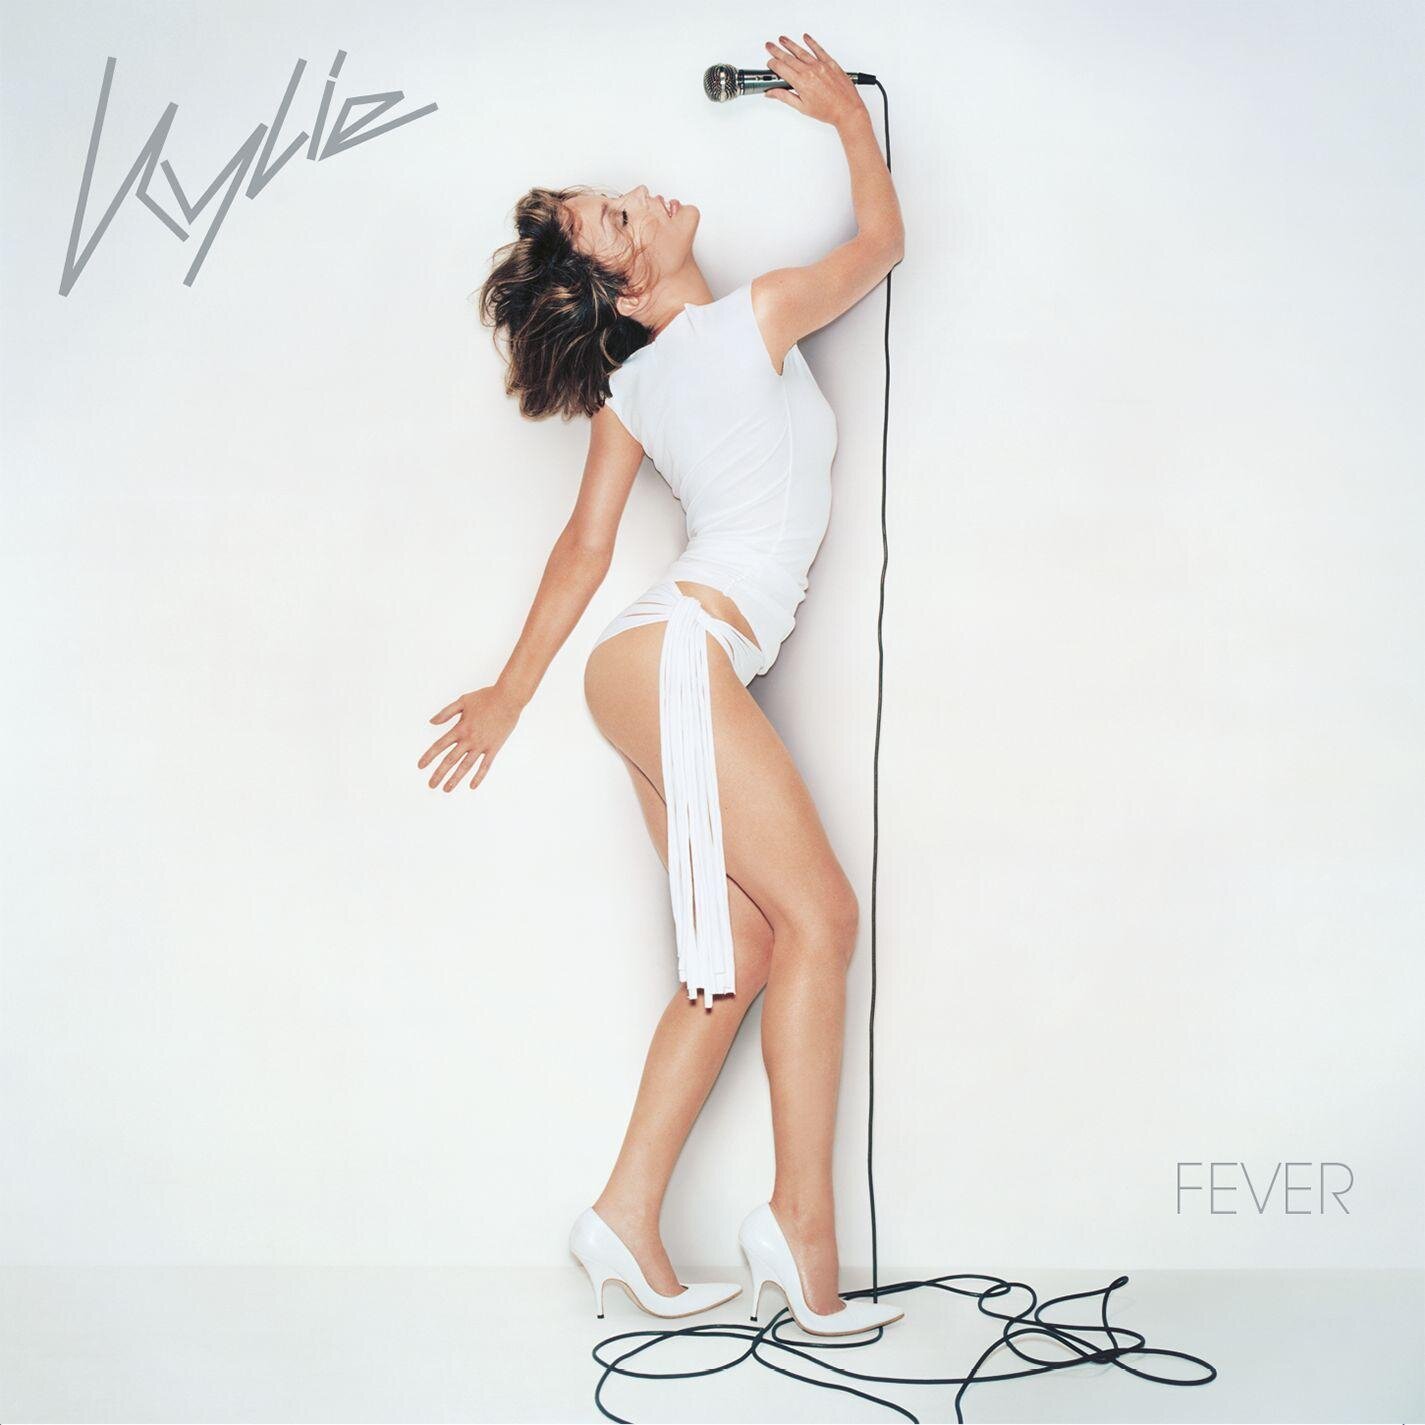 Поп WM Kylie Minogue - Fever (Limited 180 Gram White Vinyl/Poster) barry white put me in your mix disco fever 1 cd